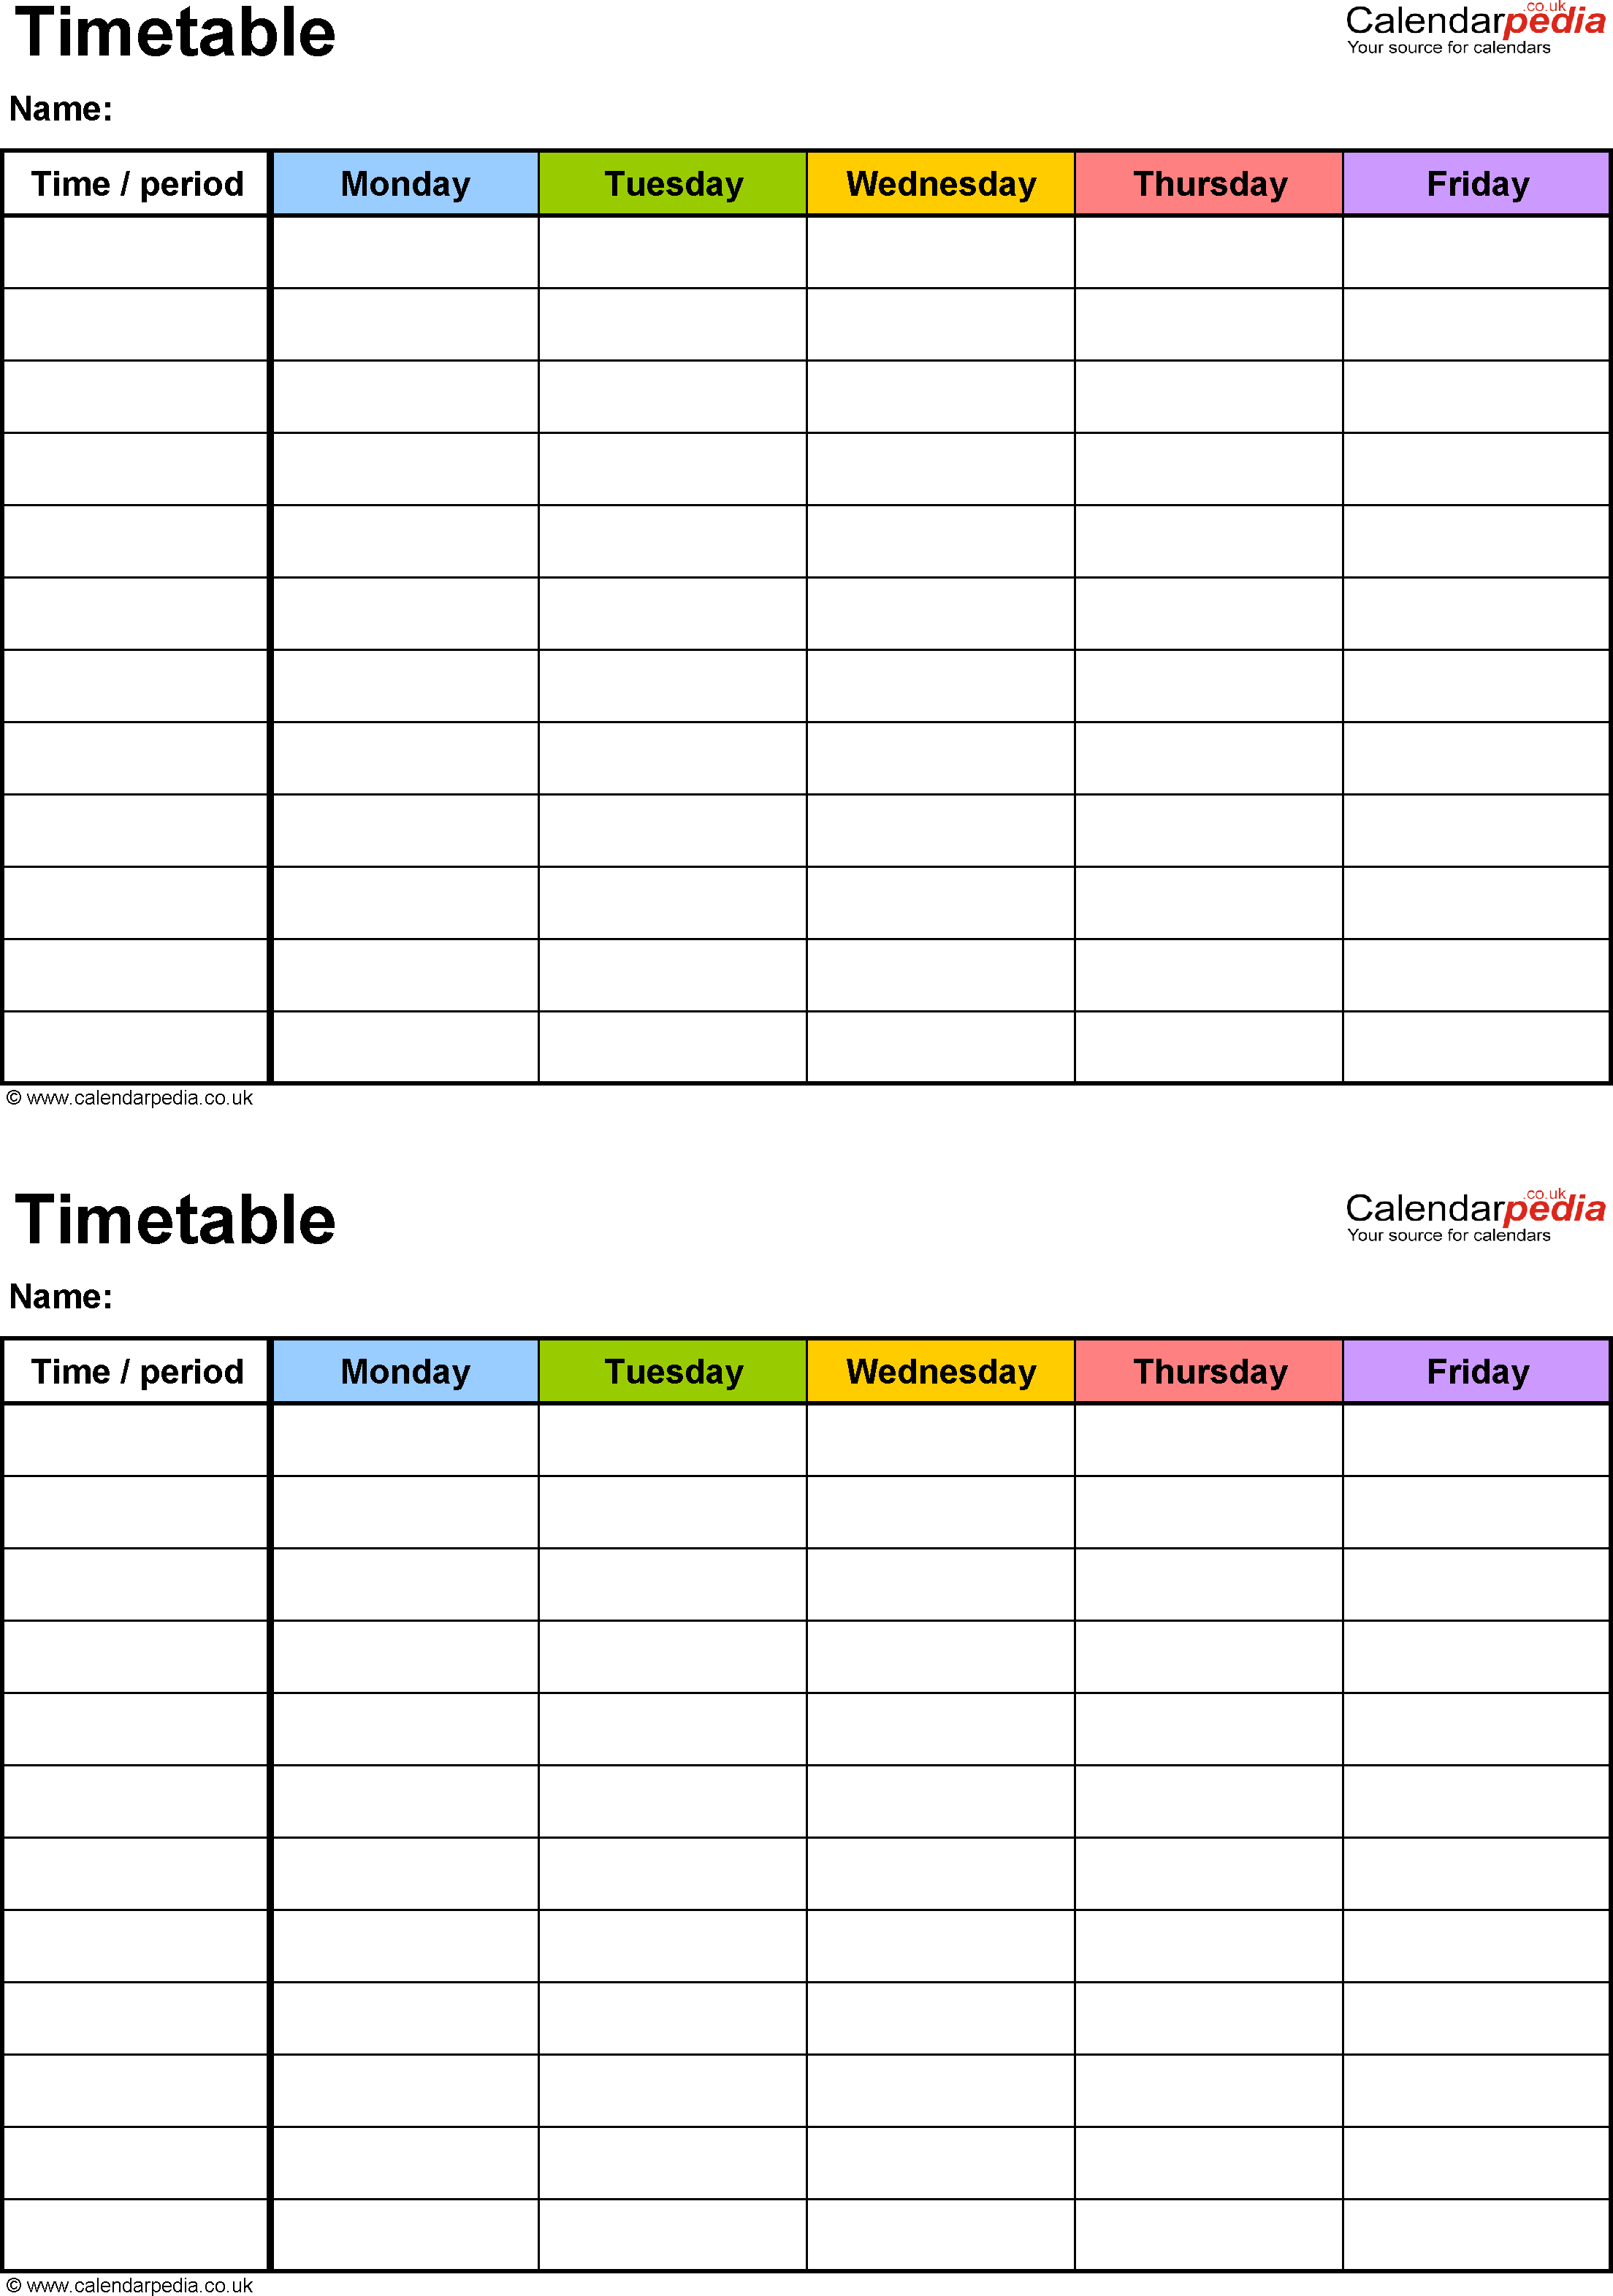 Timetable templates for Microsoft Word - free and printable Inside Blank Revision Timetable Template